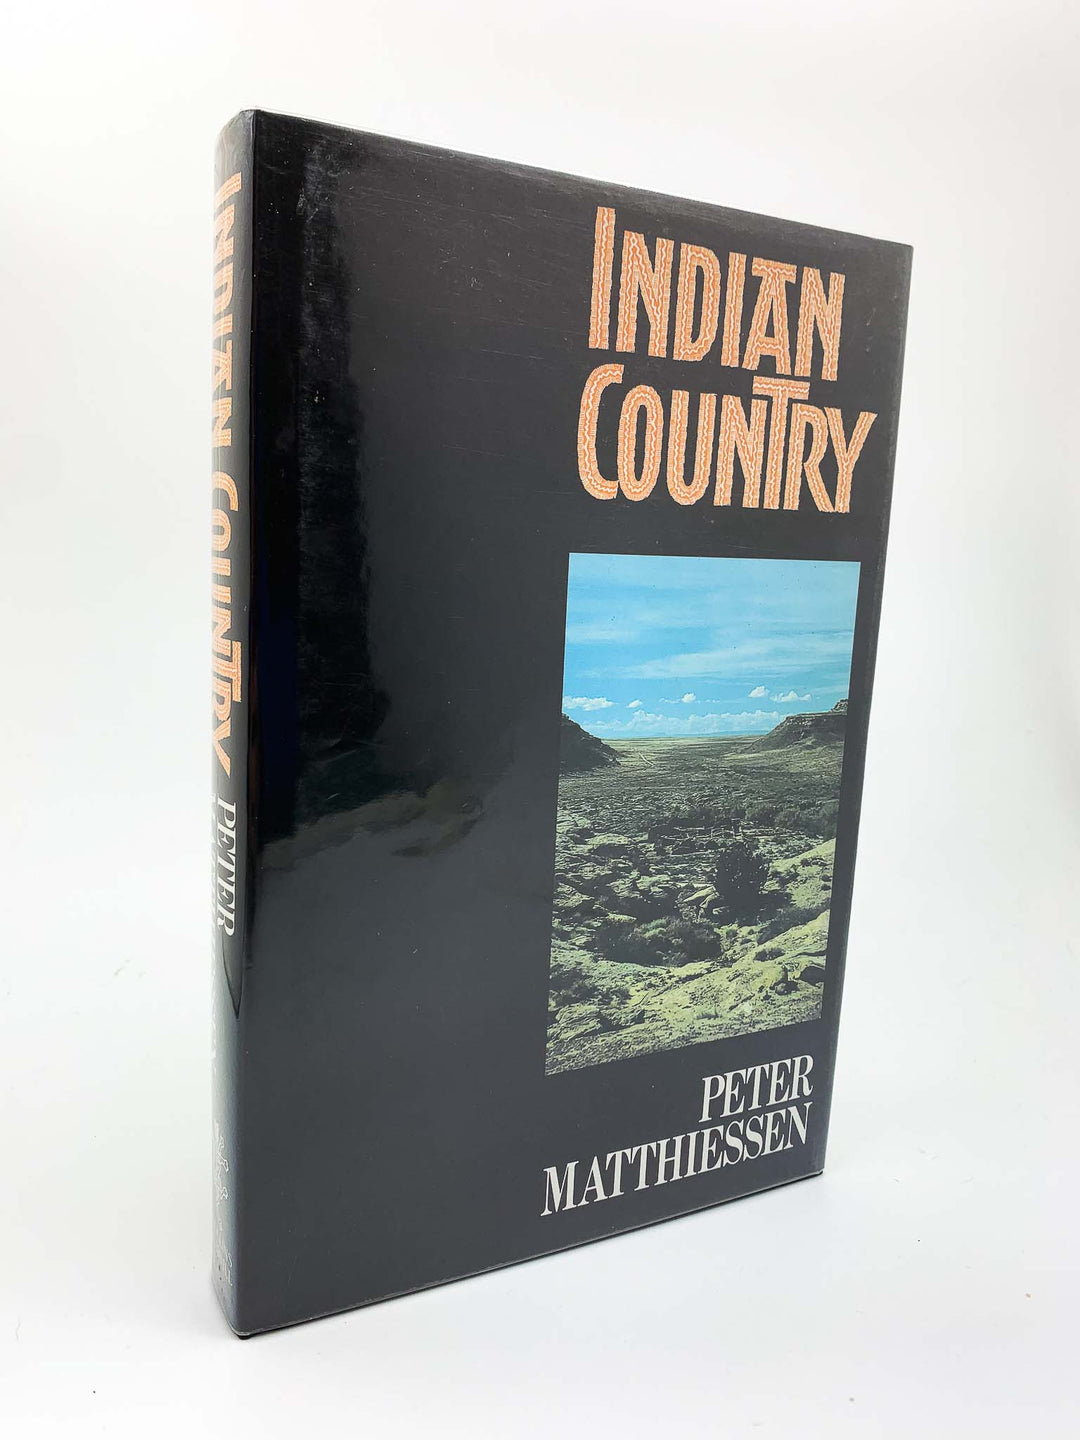 Matthiessen, Peter - Indian Country | front cover